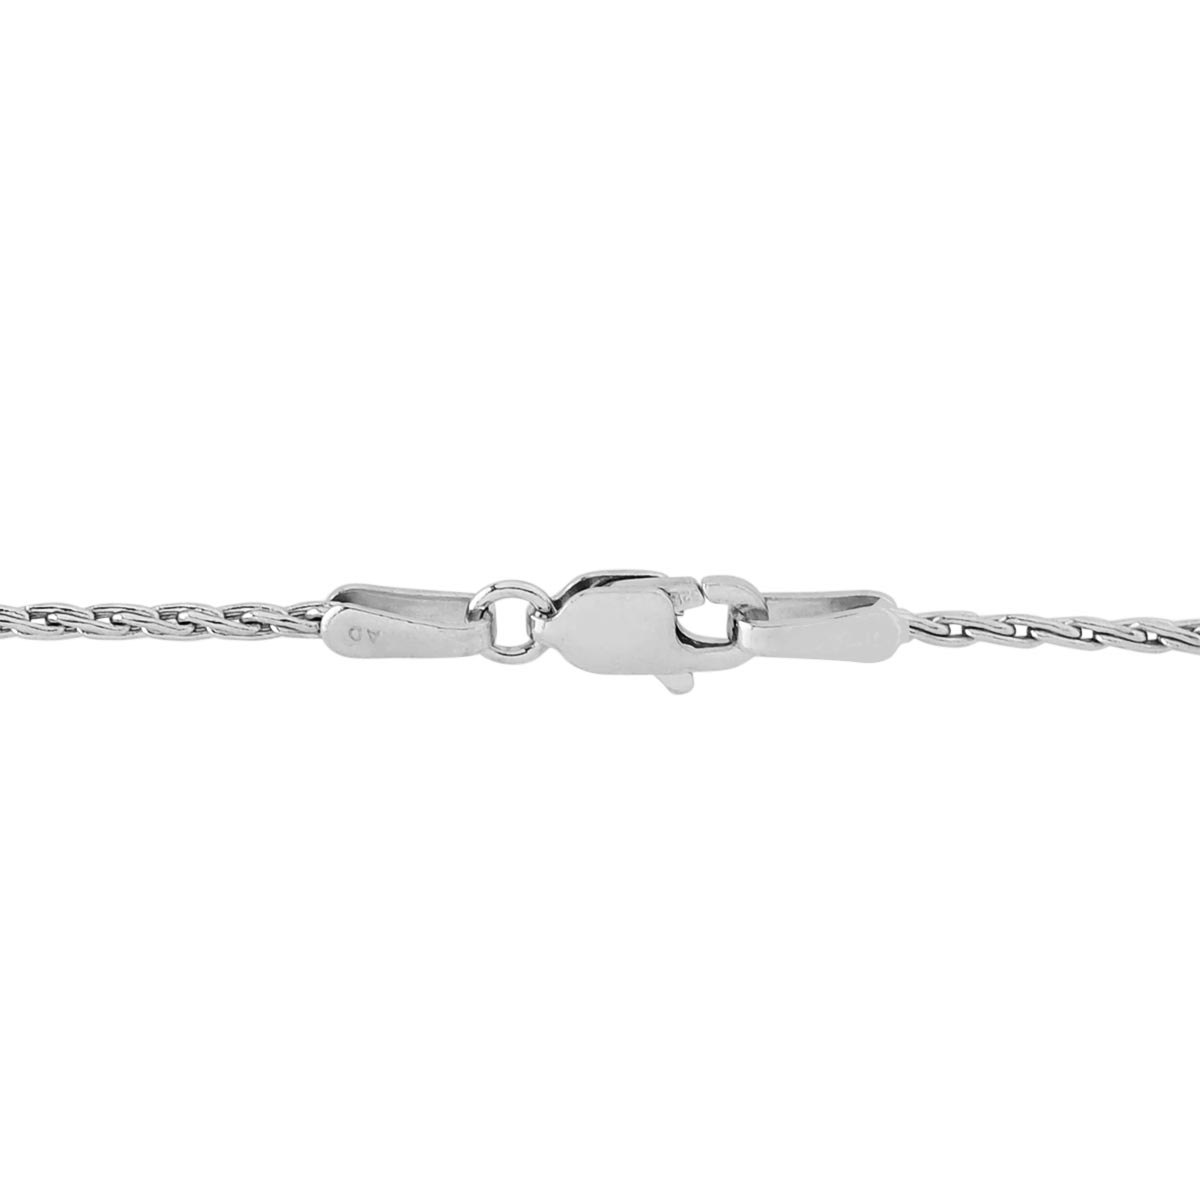 Rhodium Parisian Wheat Chain in Sterling Silver (18 inches and 1.2mm wide)